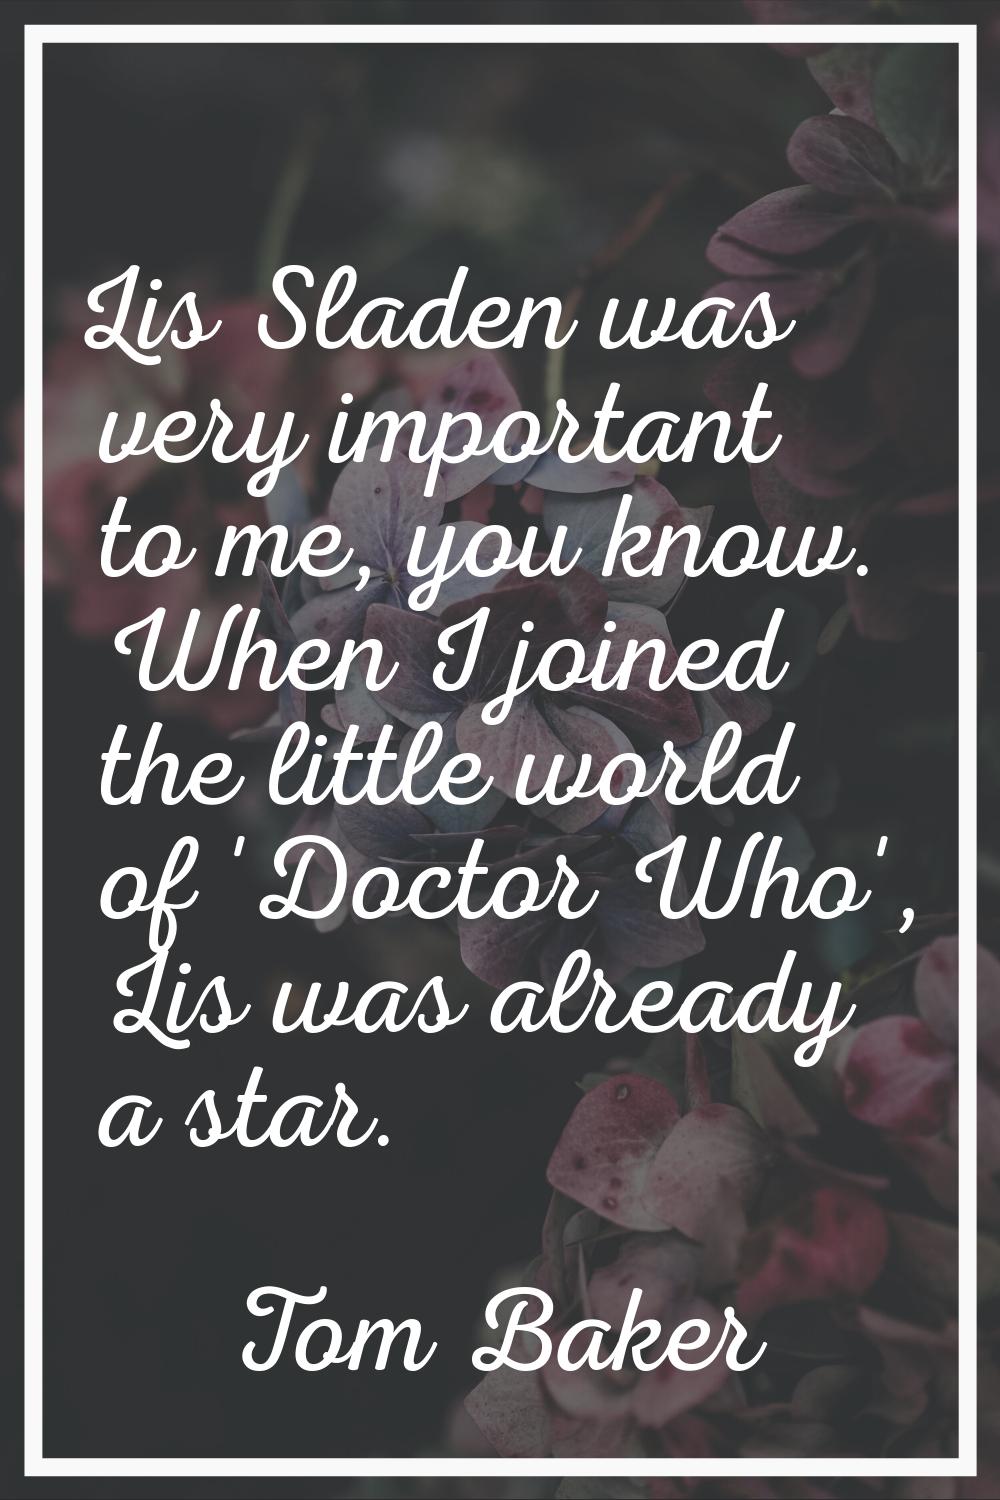 Lis Sladen was very important to me, you know. When I joined the little world of 'Doctor Who', Lis 